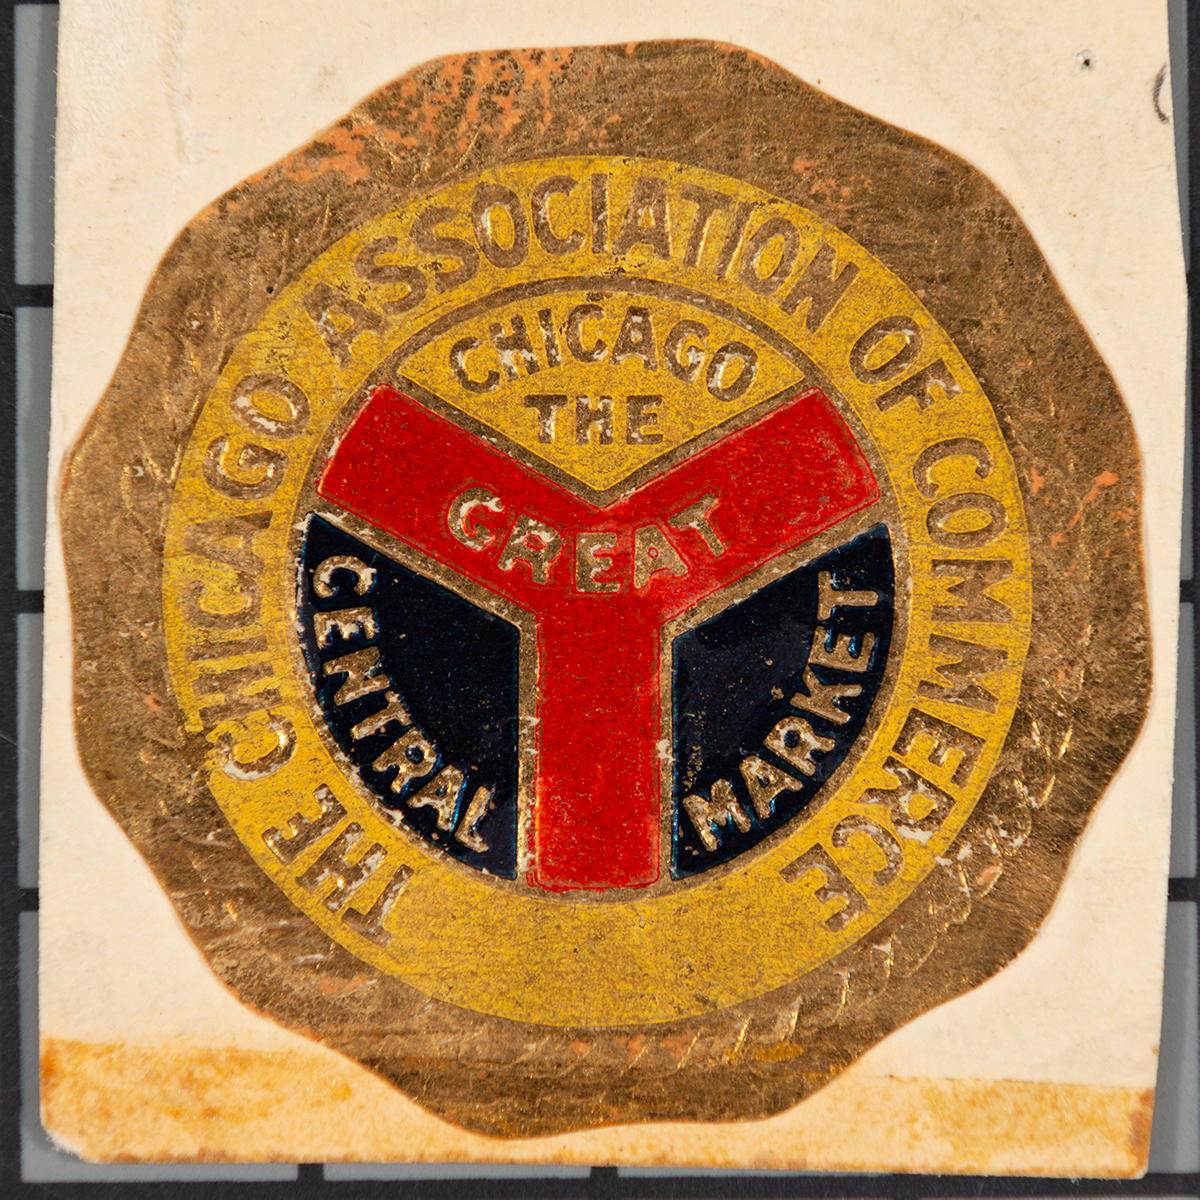 Original Municipal Device from the the Chicago Association of Commerce